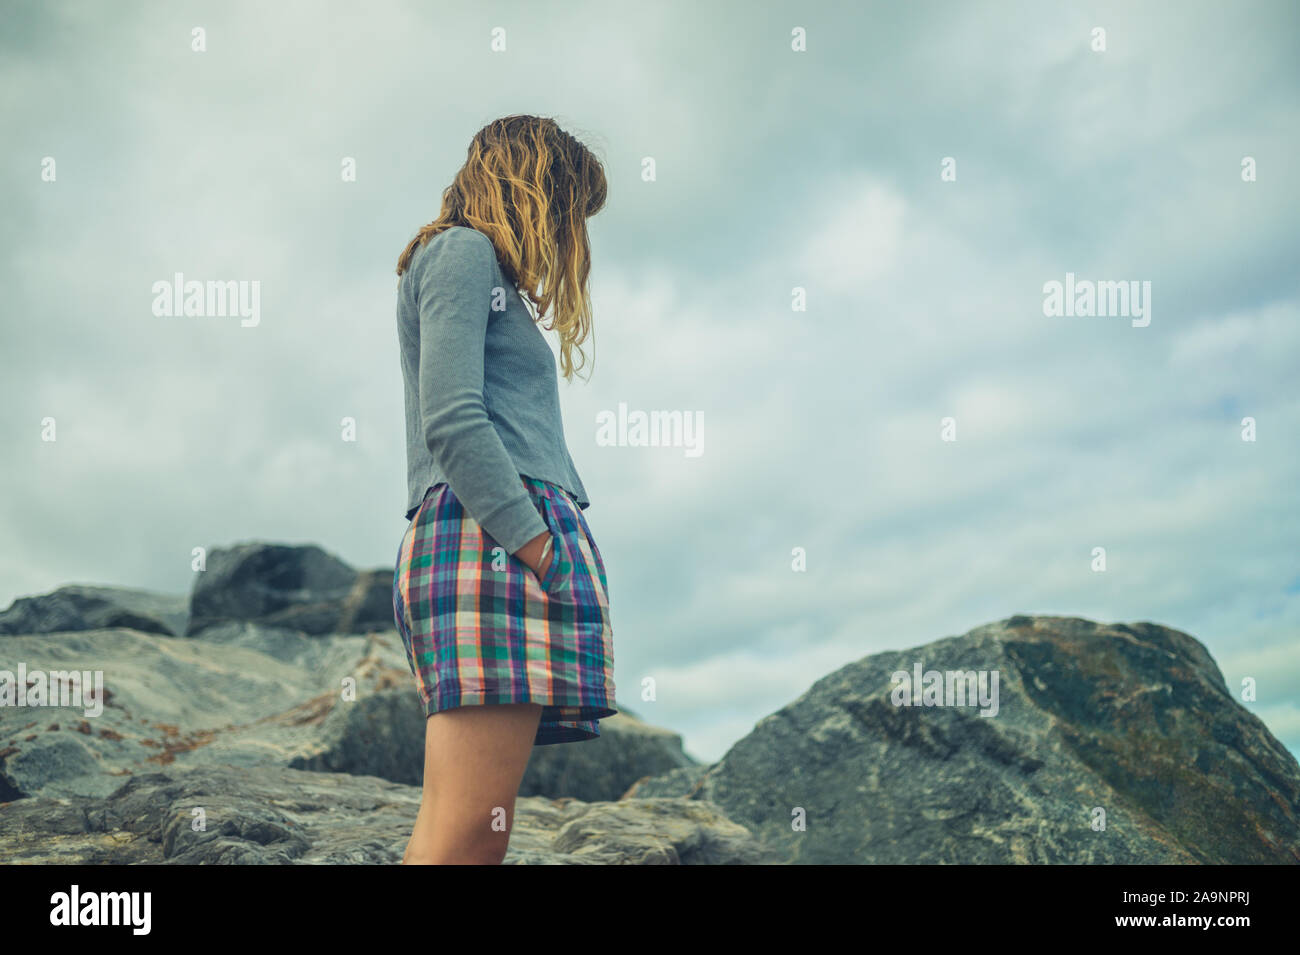 A young woman with her hands in her pockets are standing on some rocks against a cloudy sky Stock Photo